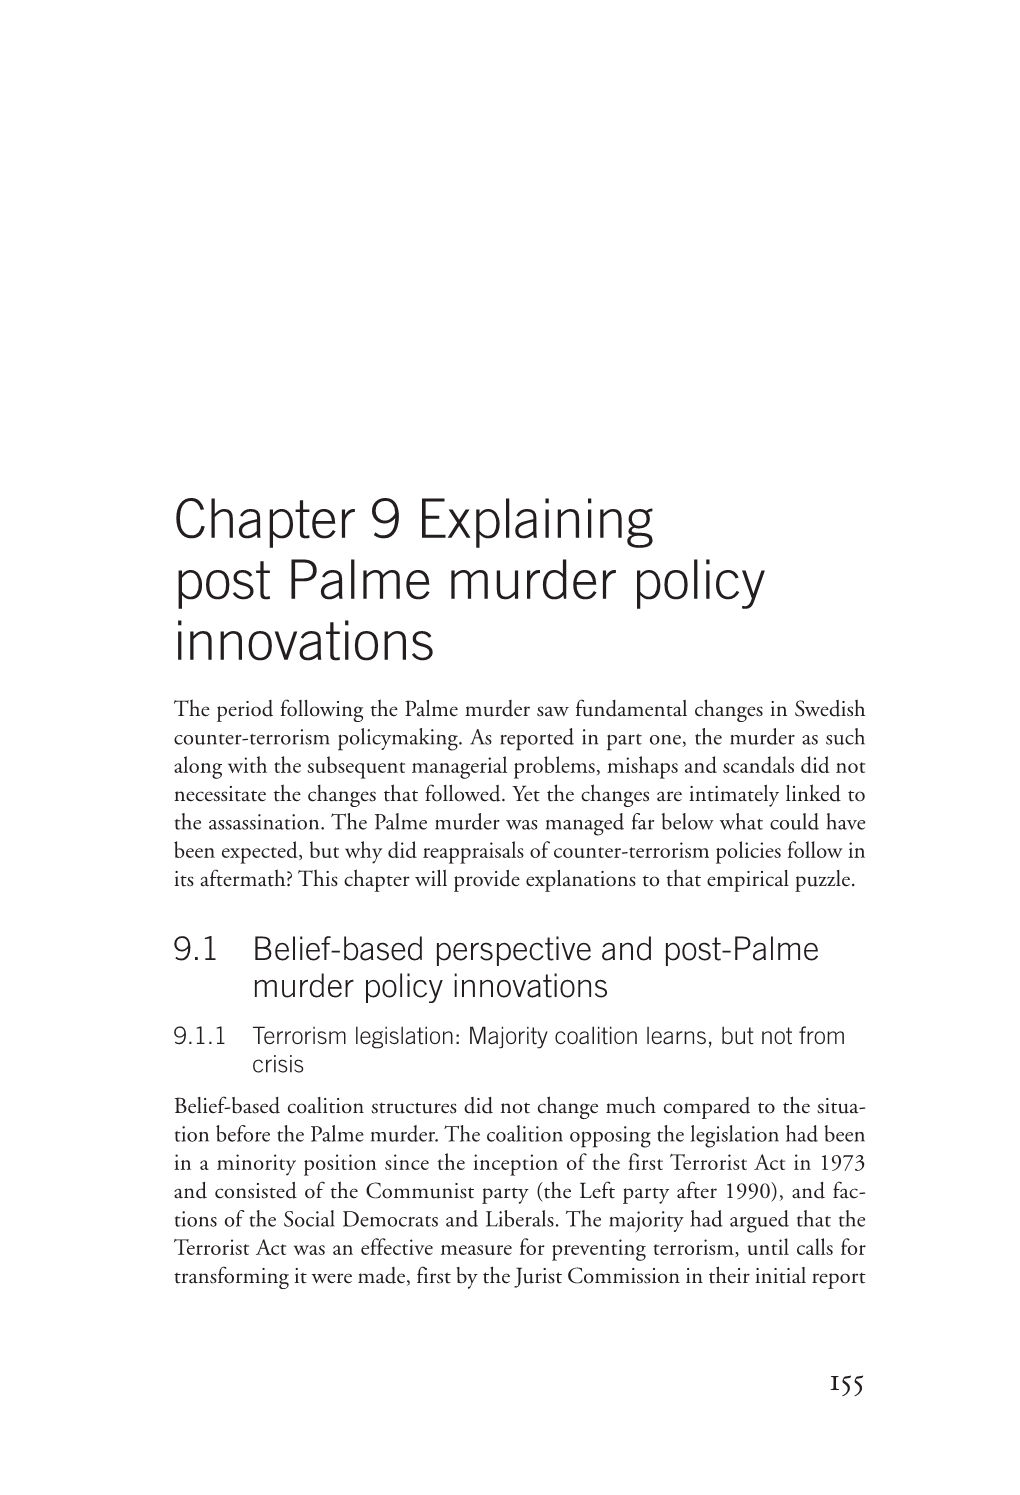 Chapter 9 Explaining Post Palme Murder Policy Innovations